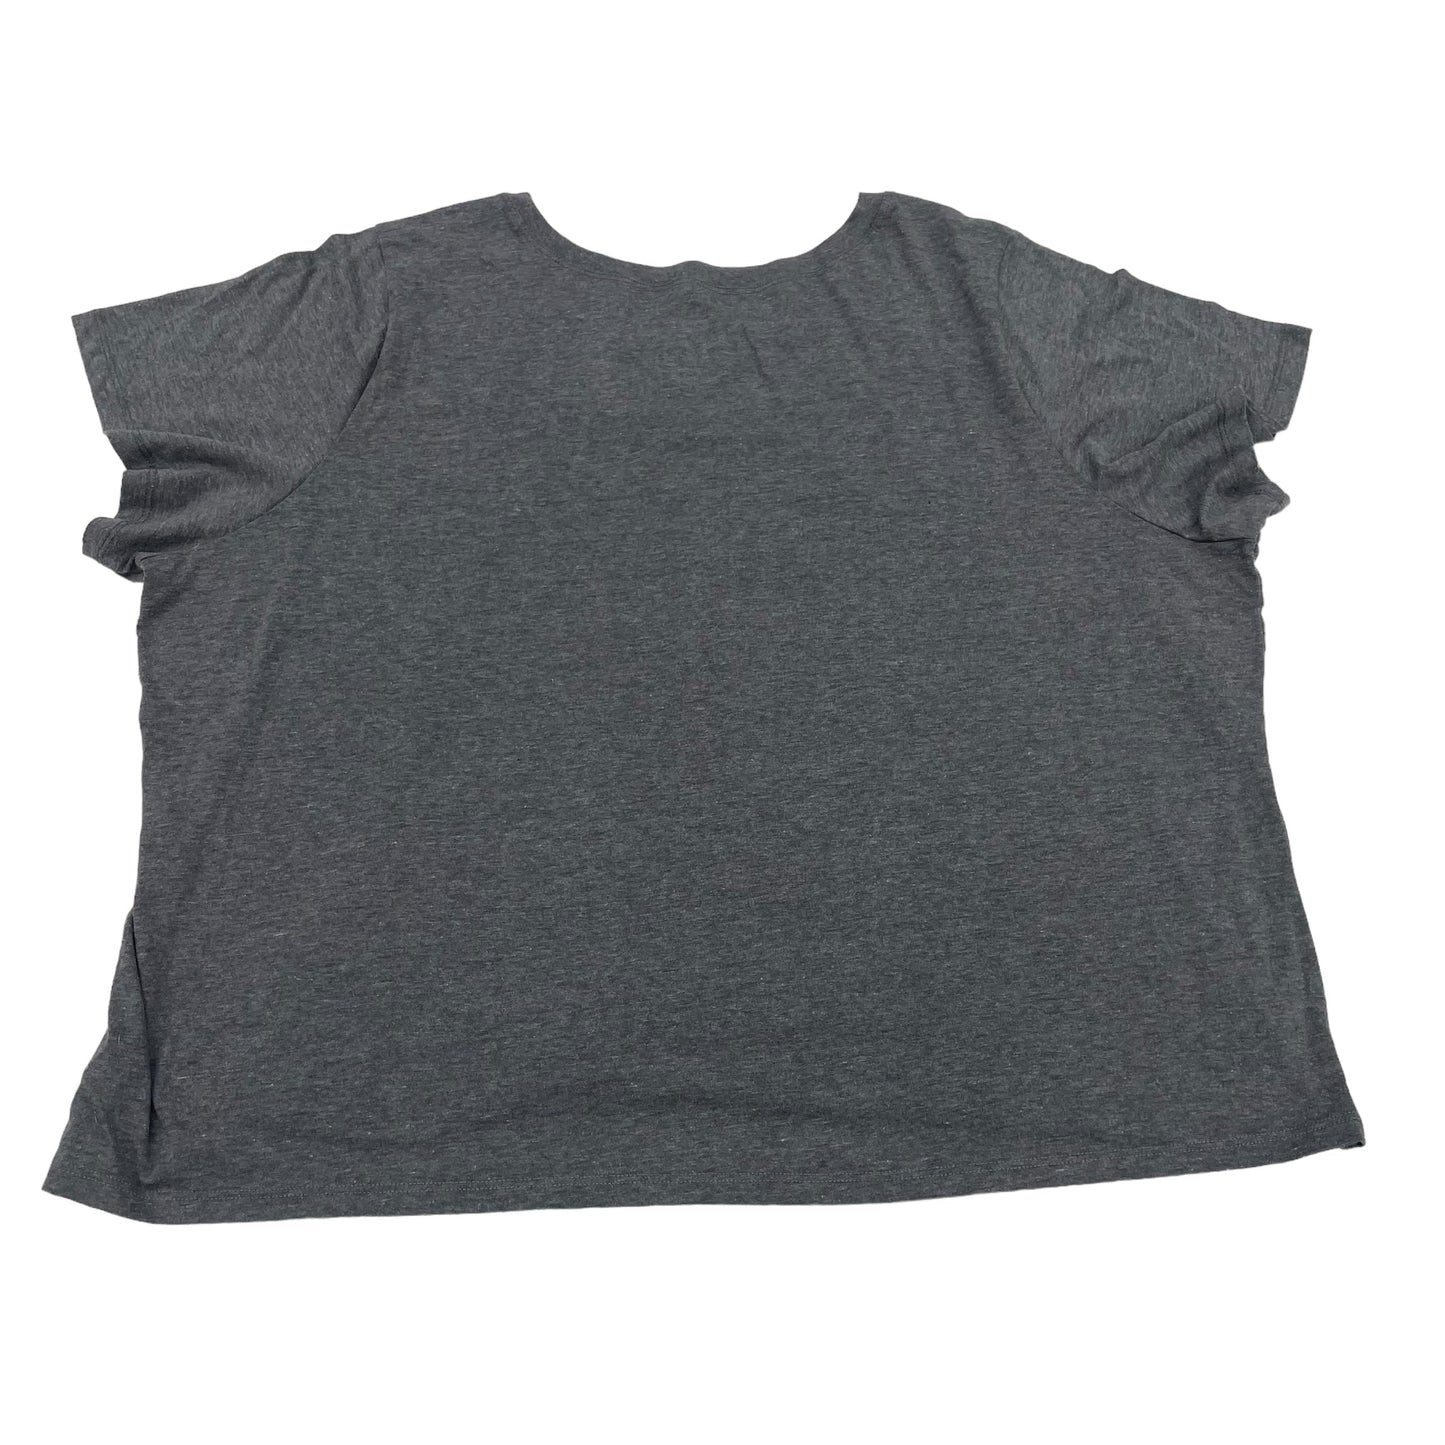 GREY TOP SS by TORRID Size:4X